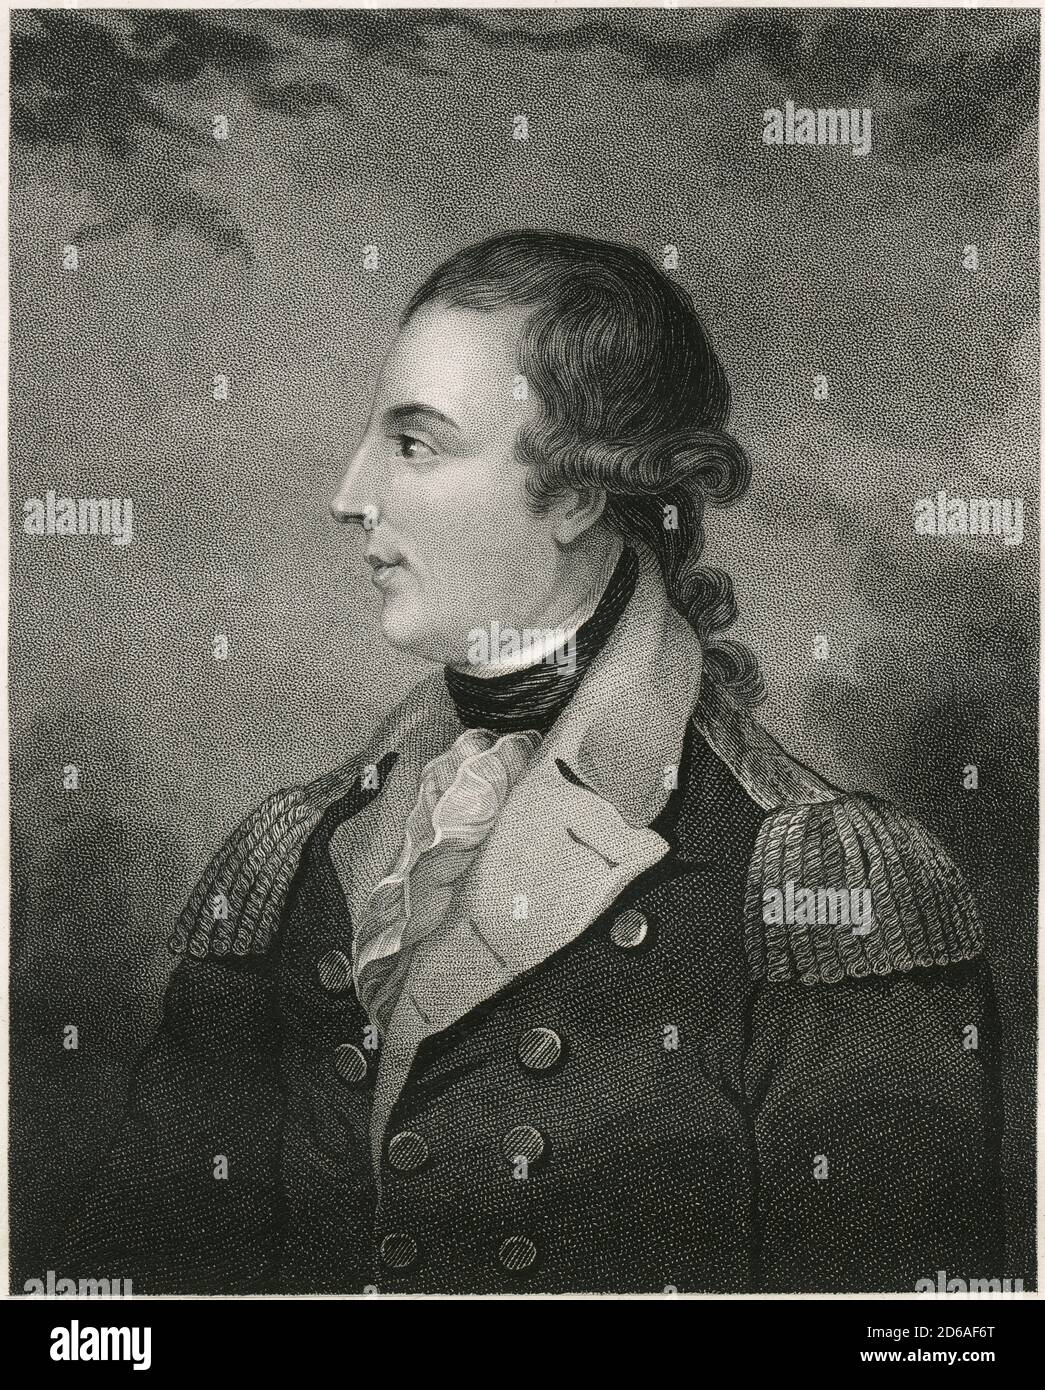 Antique c1870 engraving, Richard Montgomery. Richard Montgomery (1738-1775) was an Irish soldier who first served in the British Army. He later became a major general in the Continental Army during the American Revolutionary War. SOURCE: ORIGINAL ENGRAVING Stock Photo